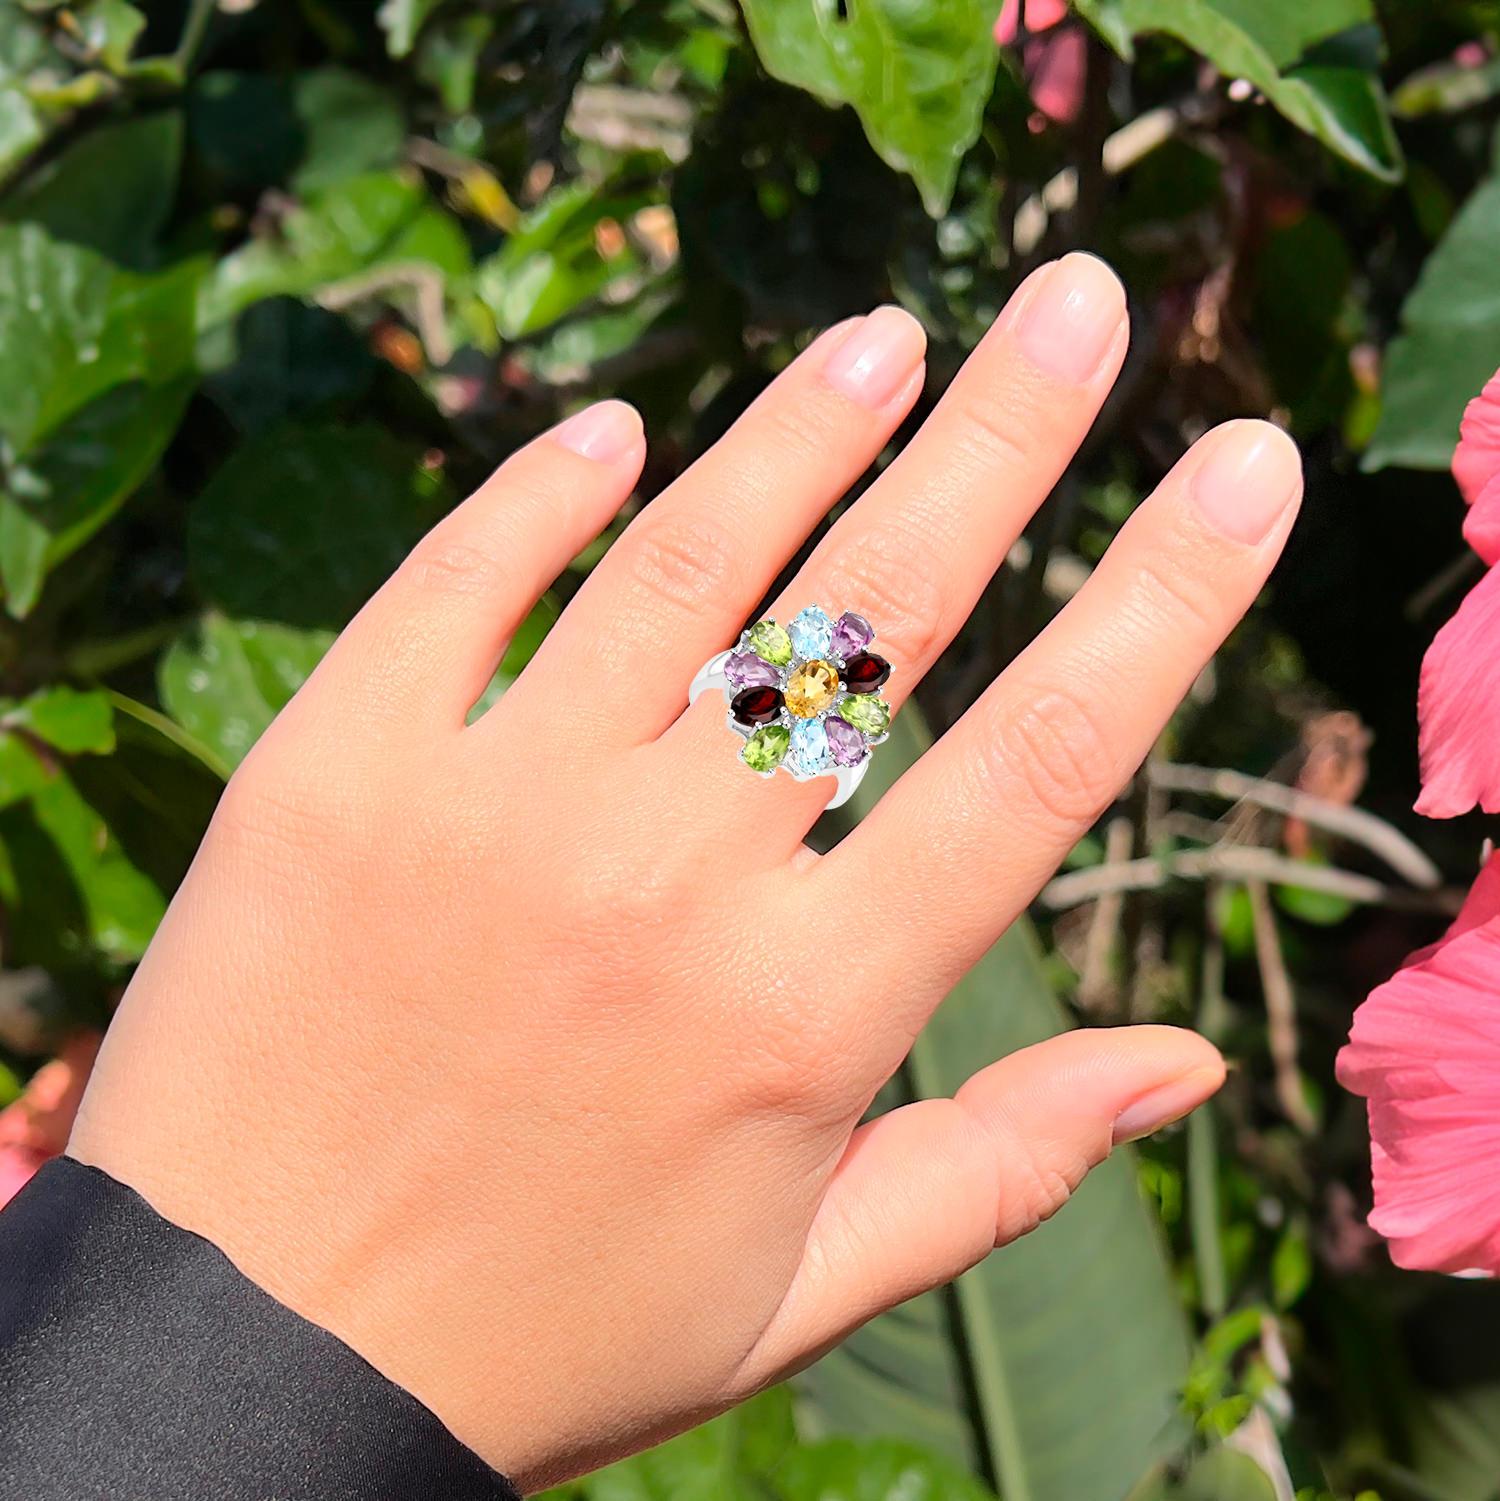 Oval Cut Multicolor Gemstones Flower Ring 5.2 Carats Sterling Silver For Sale